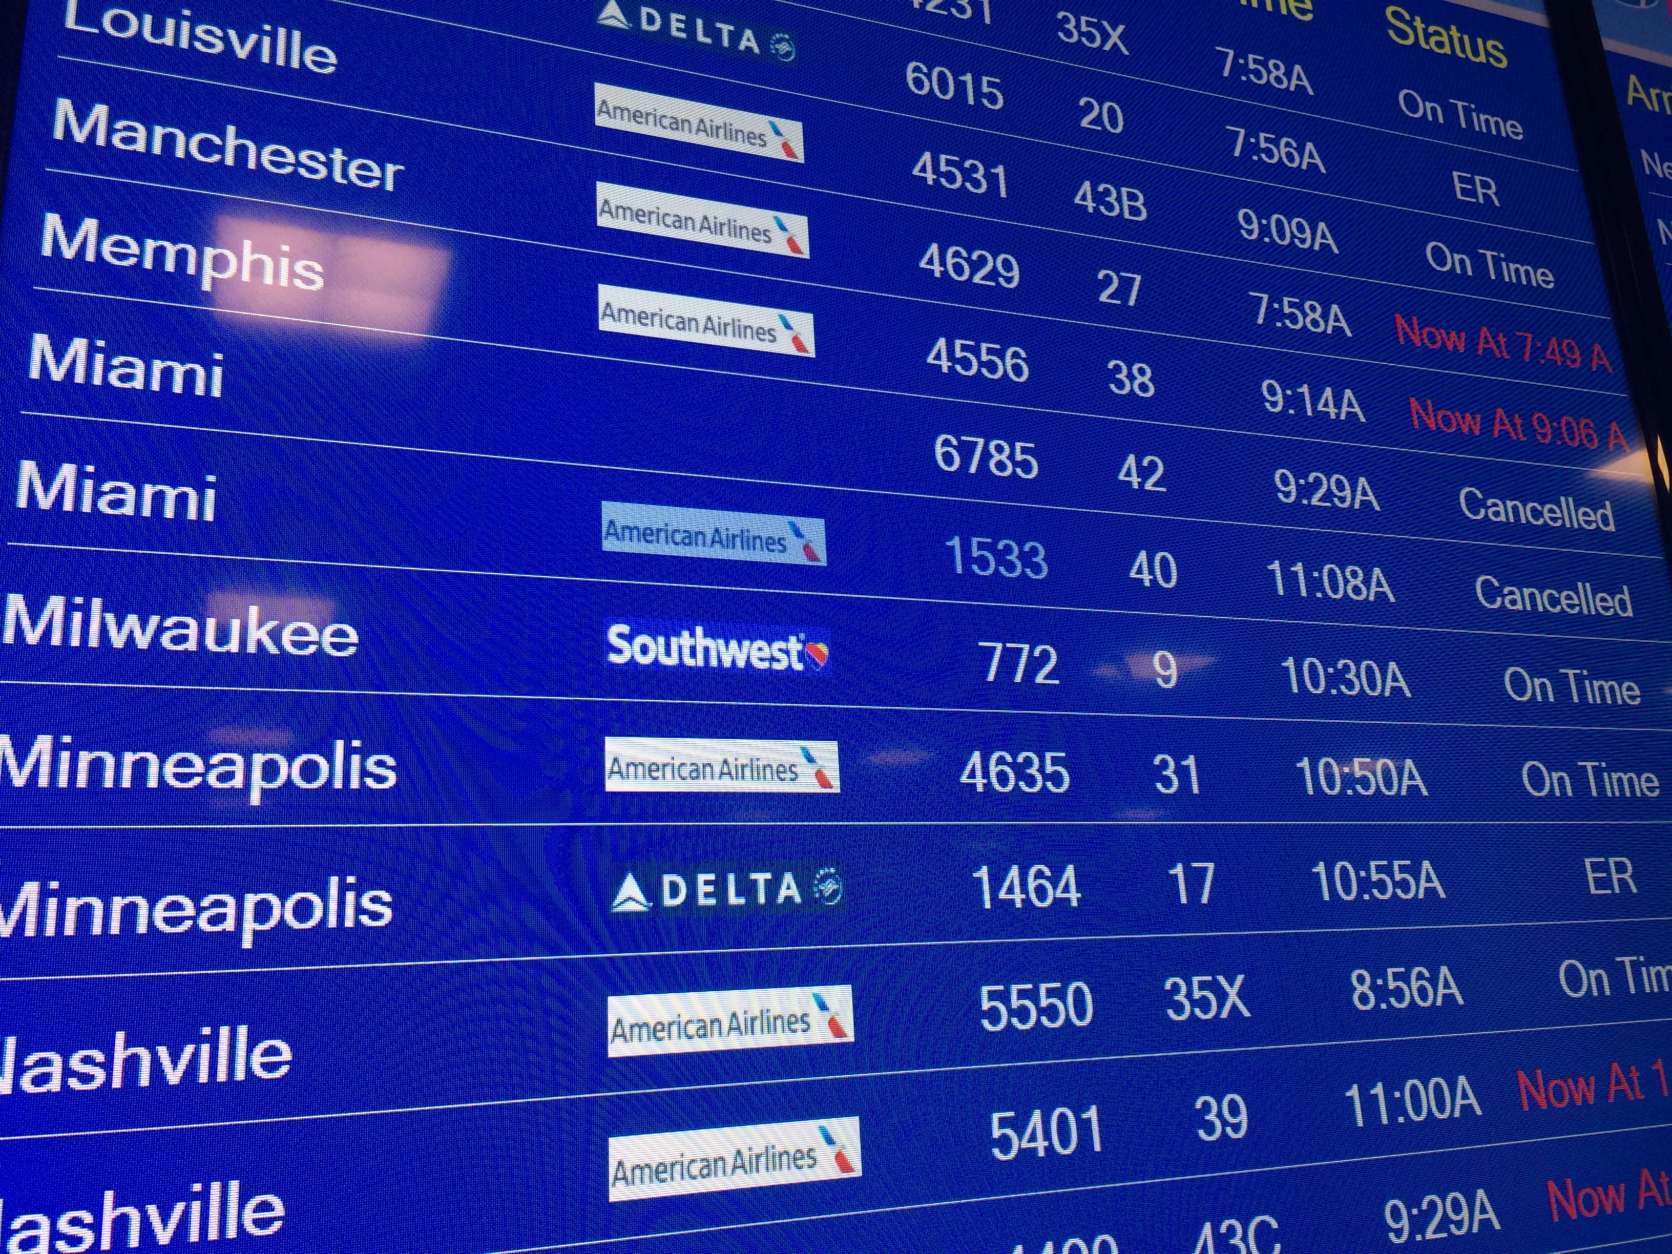 The board at Reagan National Airport Thursday shows cancellations for Miami flights. (WTOP/Nick Iannelli)